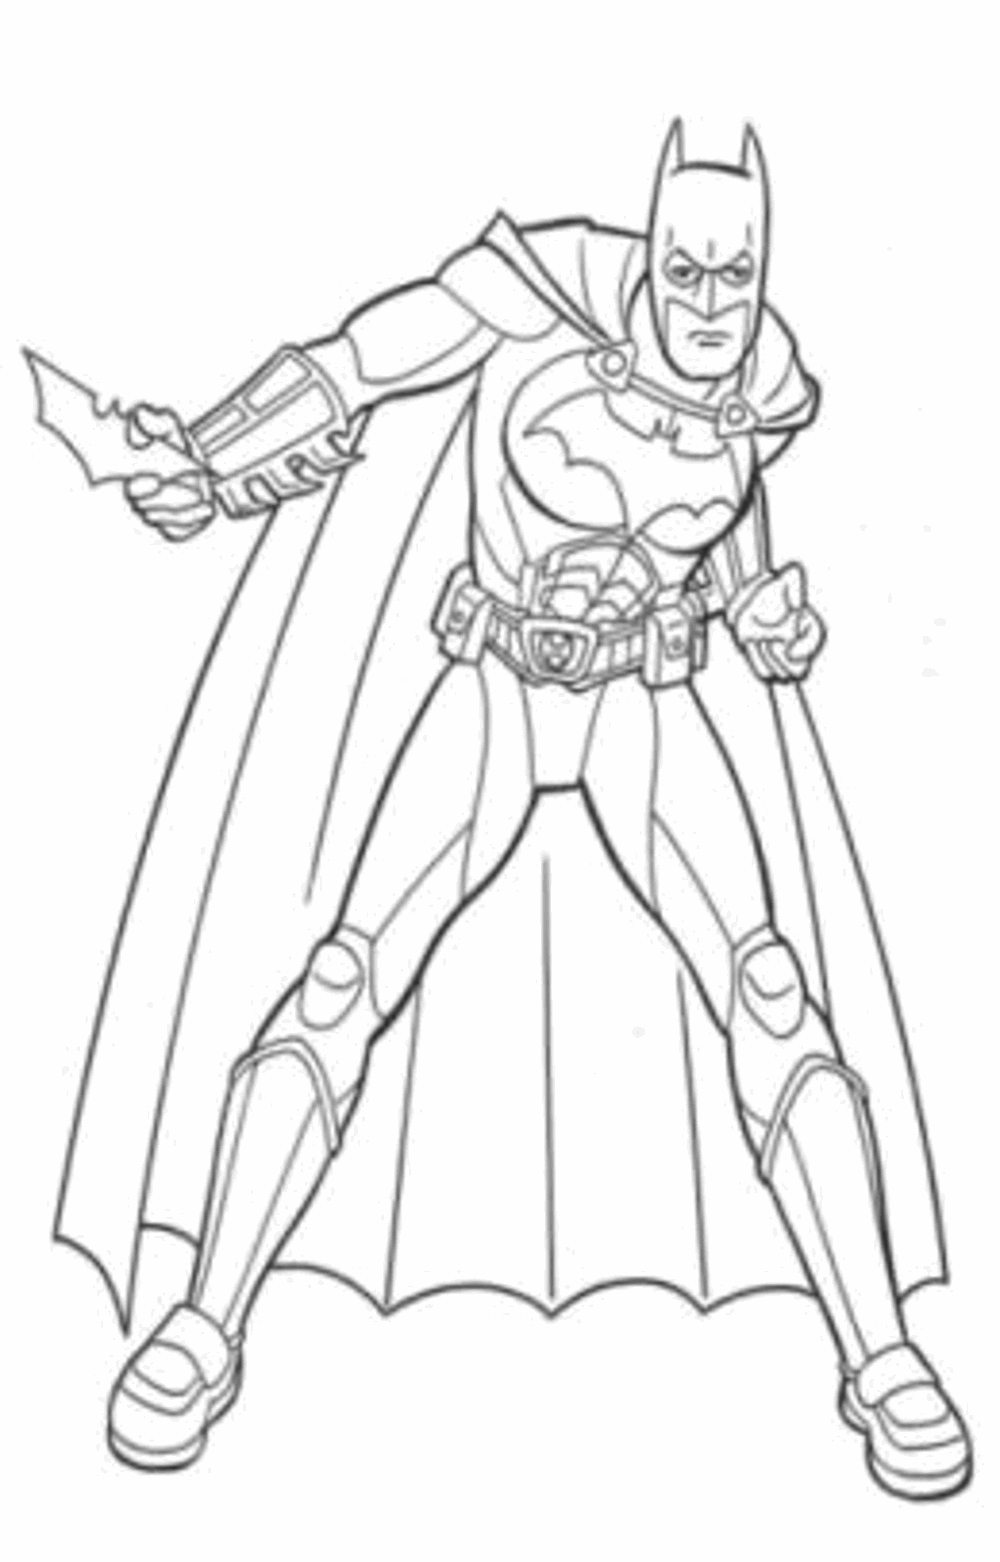 Print & Download - Batman Coloring Pages for Your Children